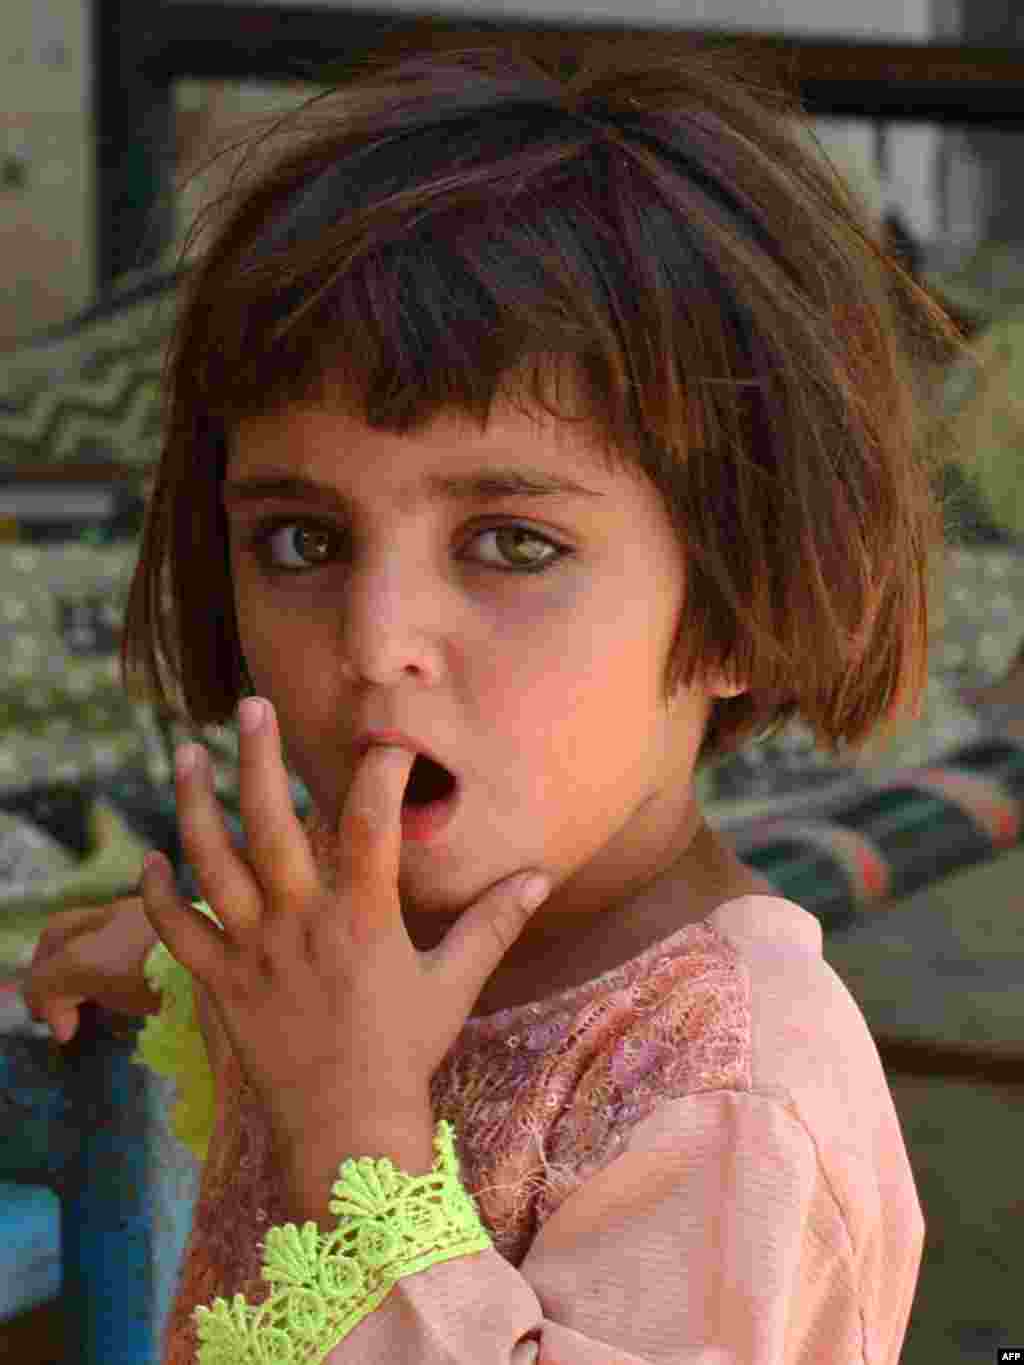 An internally displaced girl from North Waziristan looks on while taking shelter with her family at a school in Bannu, Pakistan.